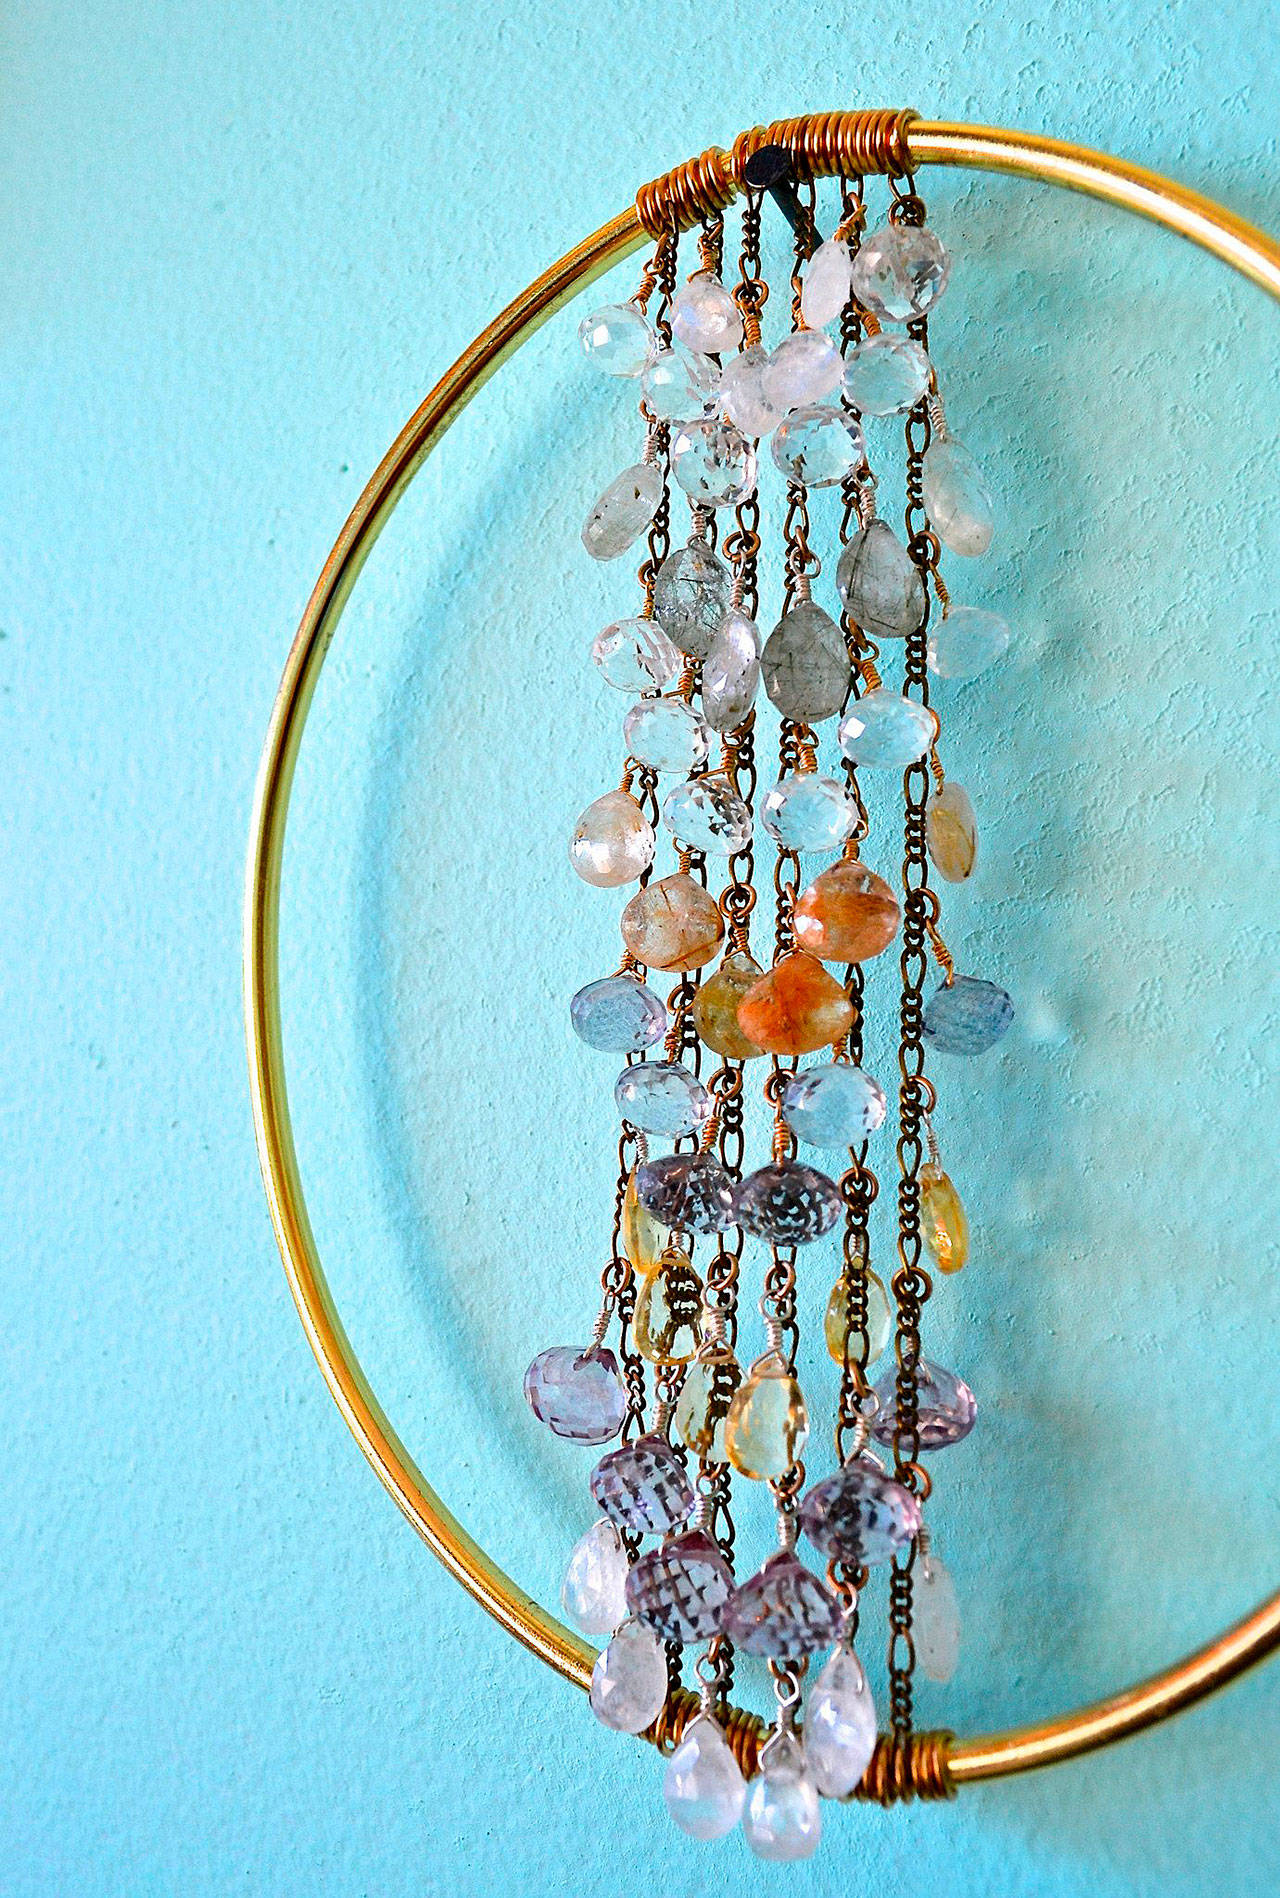 Alexa Allamano photo — Allamano makes home decor in addition to jewelry. In this piece, 52 gemstones are tethered to vertical chains and suspended in the center of a brass oval.